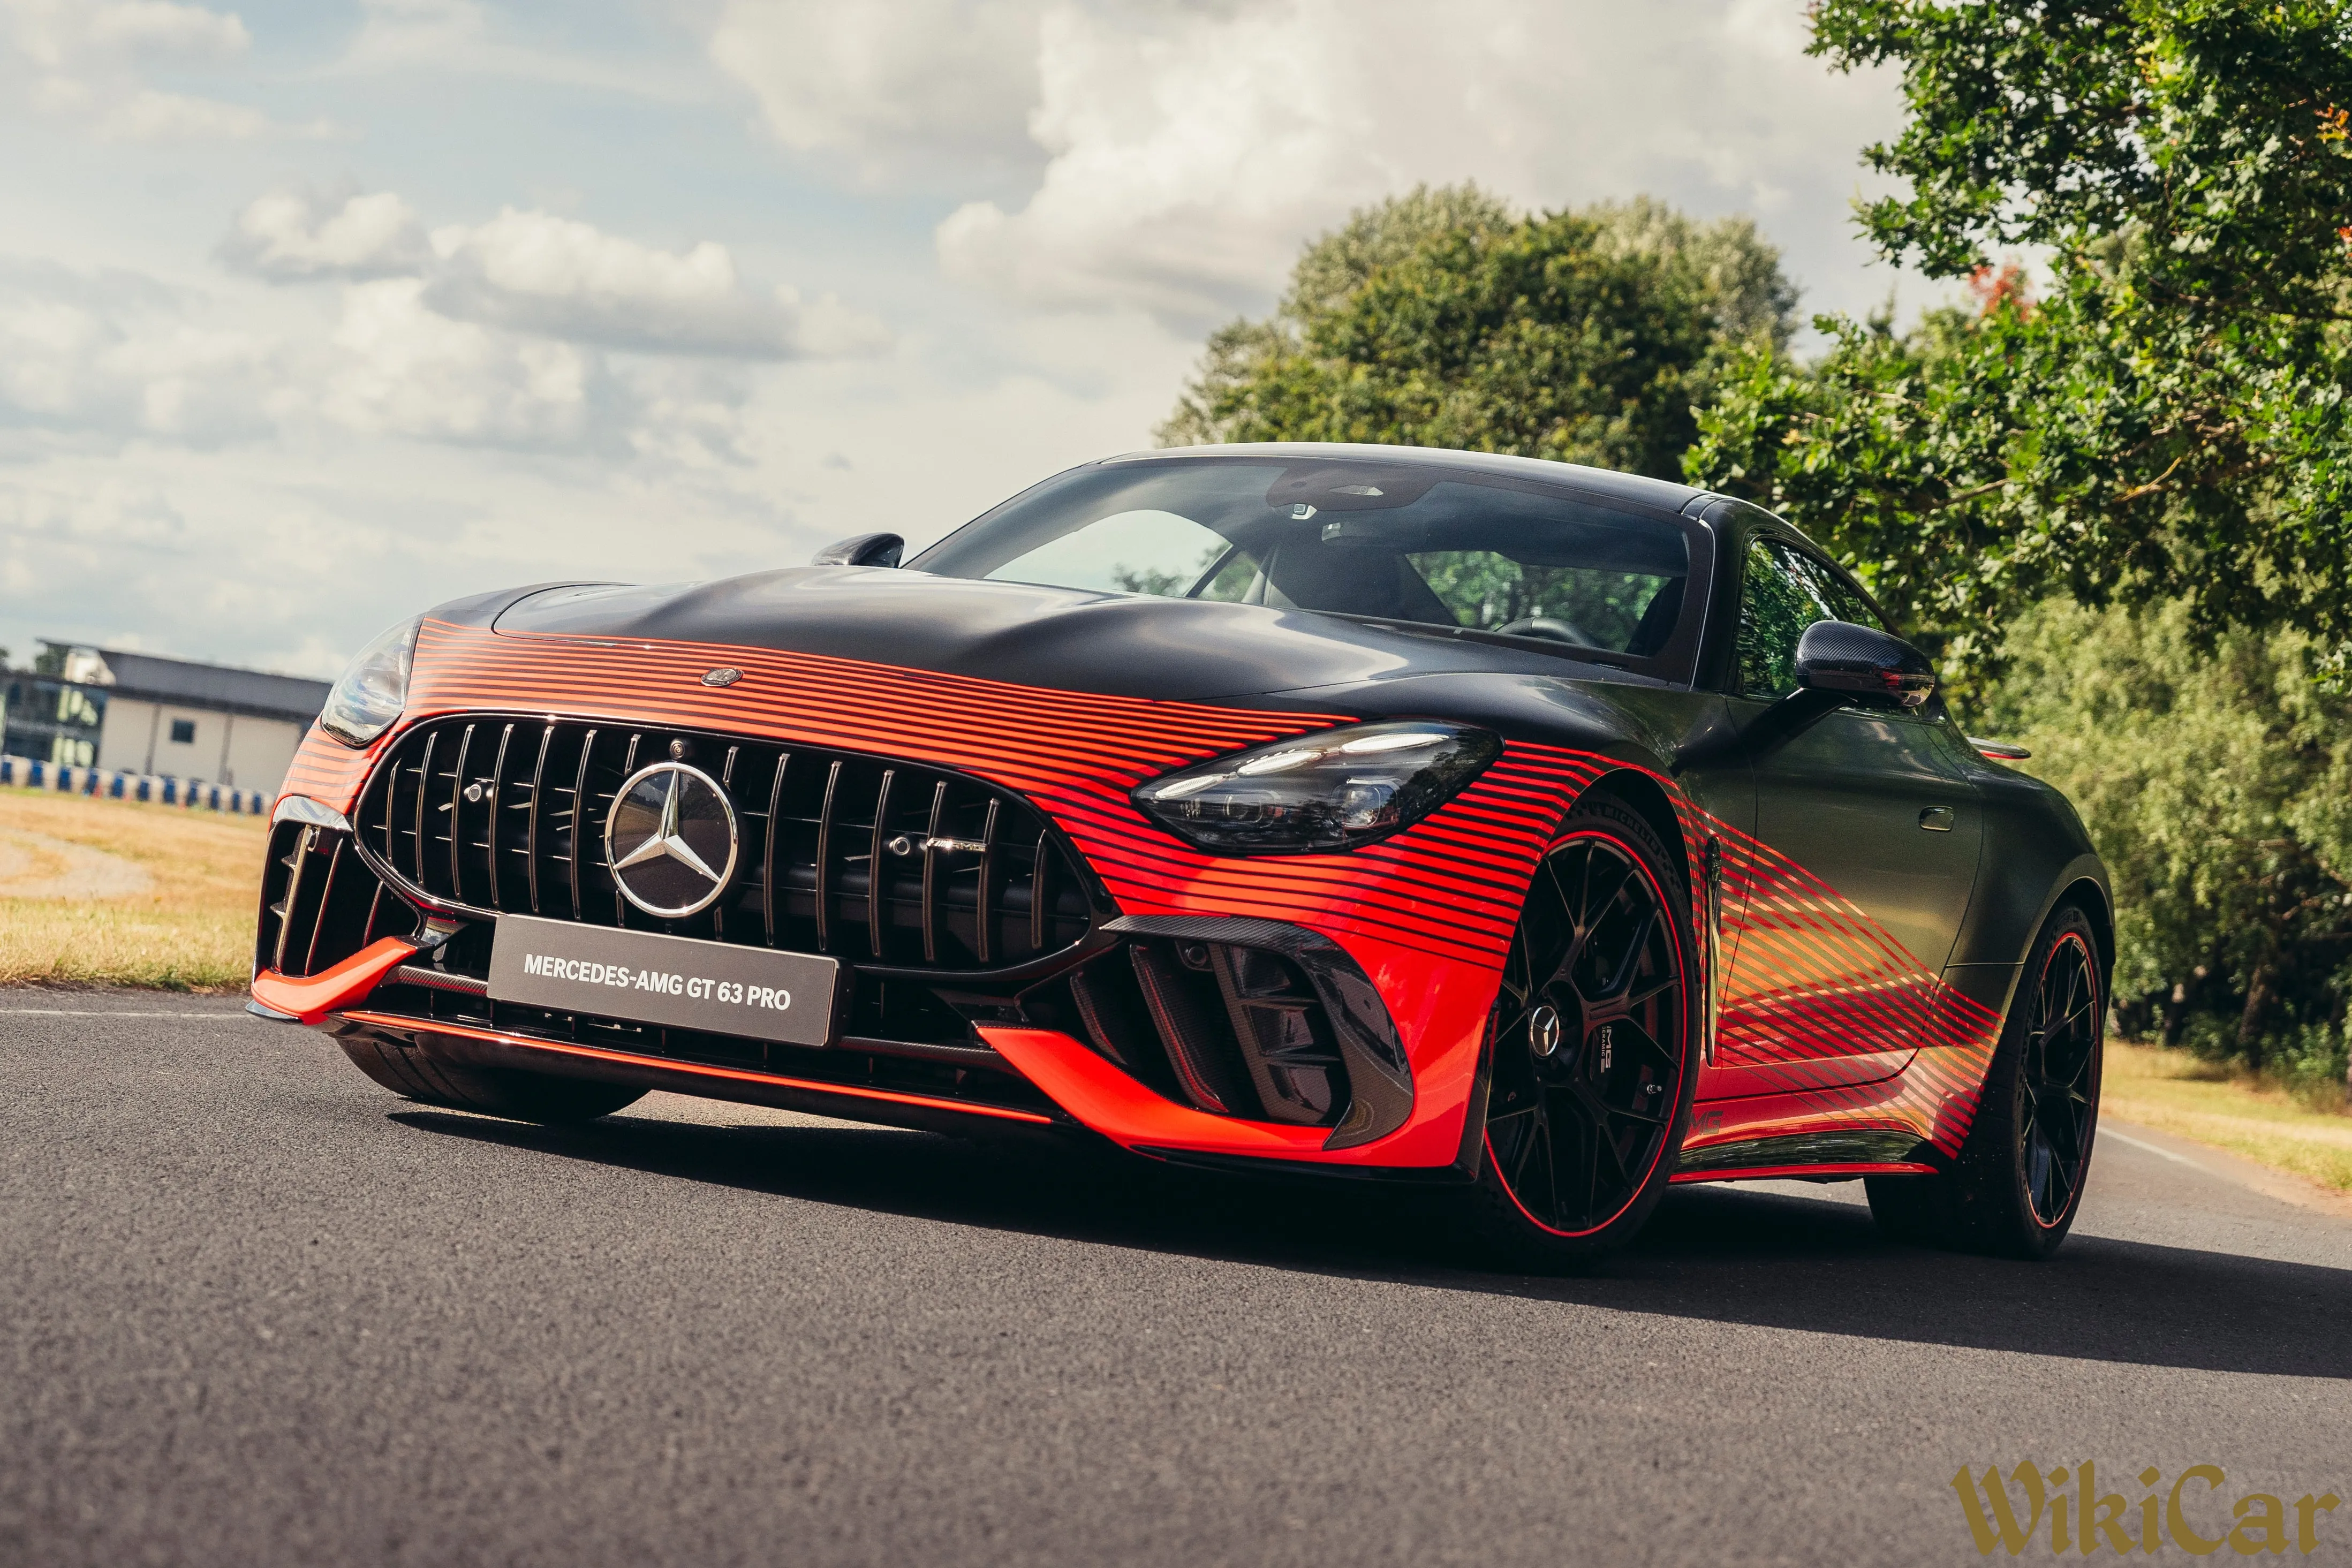 Mercedes-AMG GT 63 Pro 4MATIC – Supercars for the track